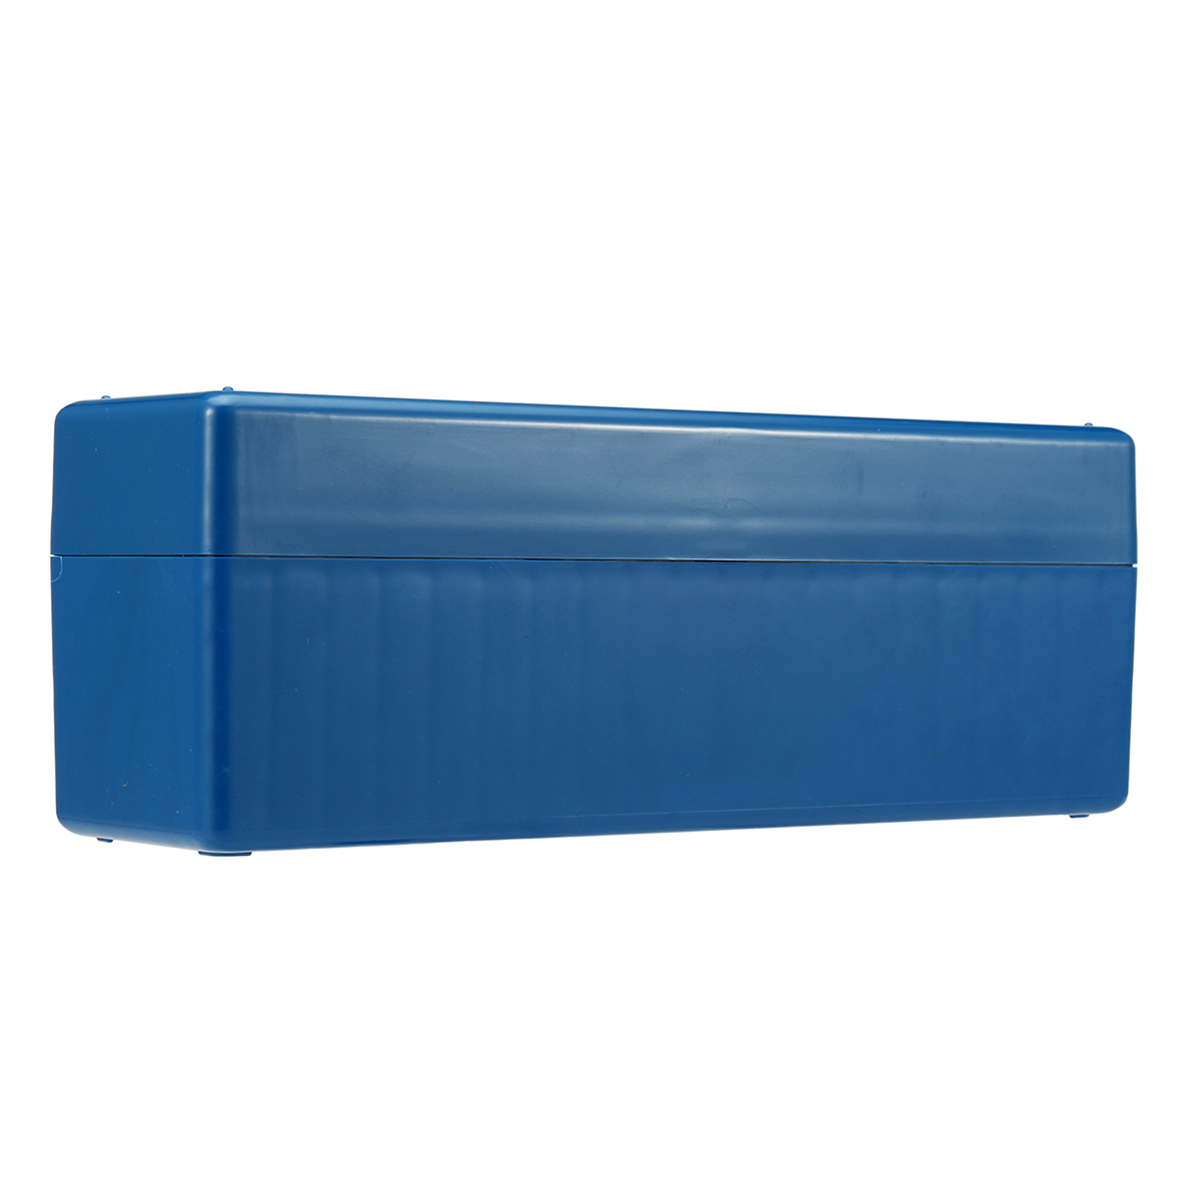 25x9x7cm-Blue-Storage-Tool-Box-Case-Holds-20-Individual-Certified-PCGS-NGC-ICG-Coin-Holders-1425243-6